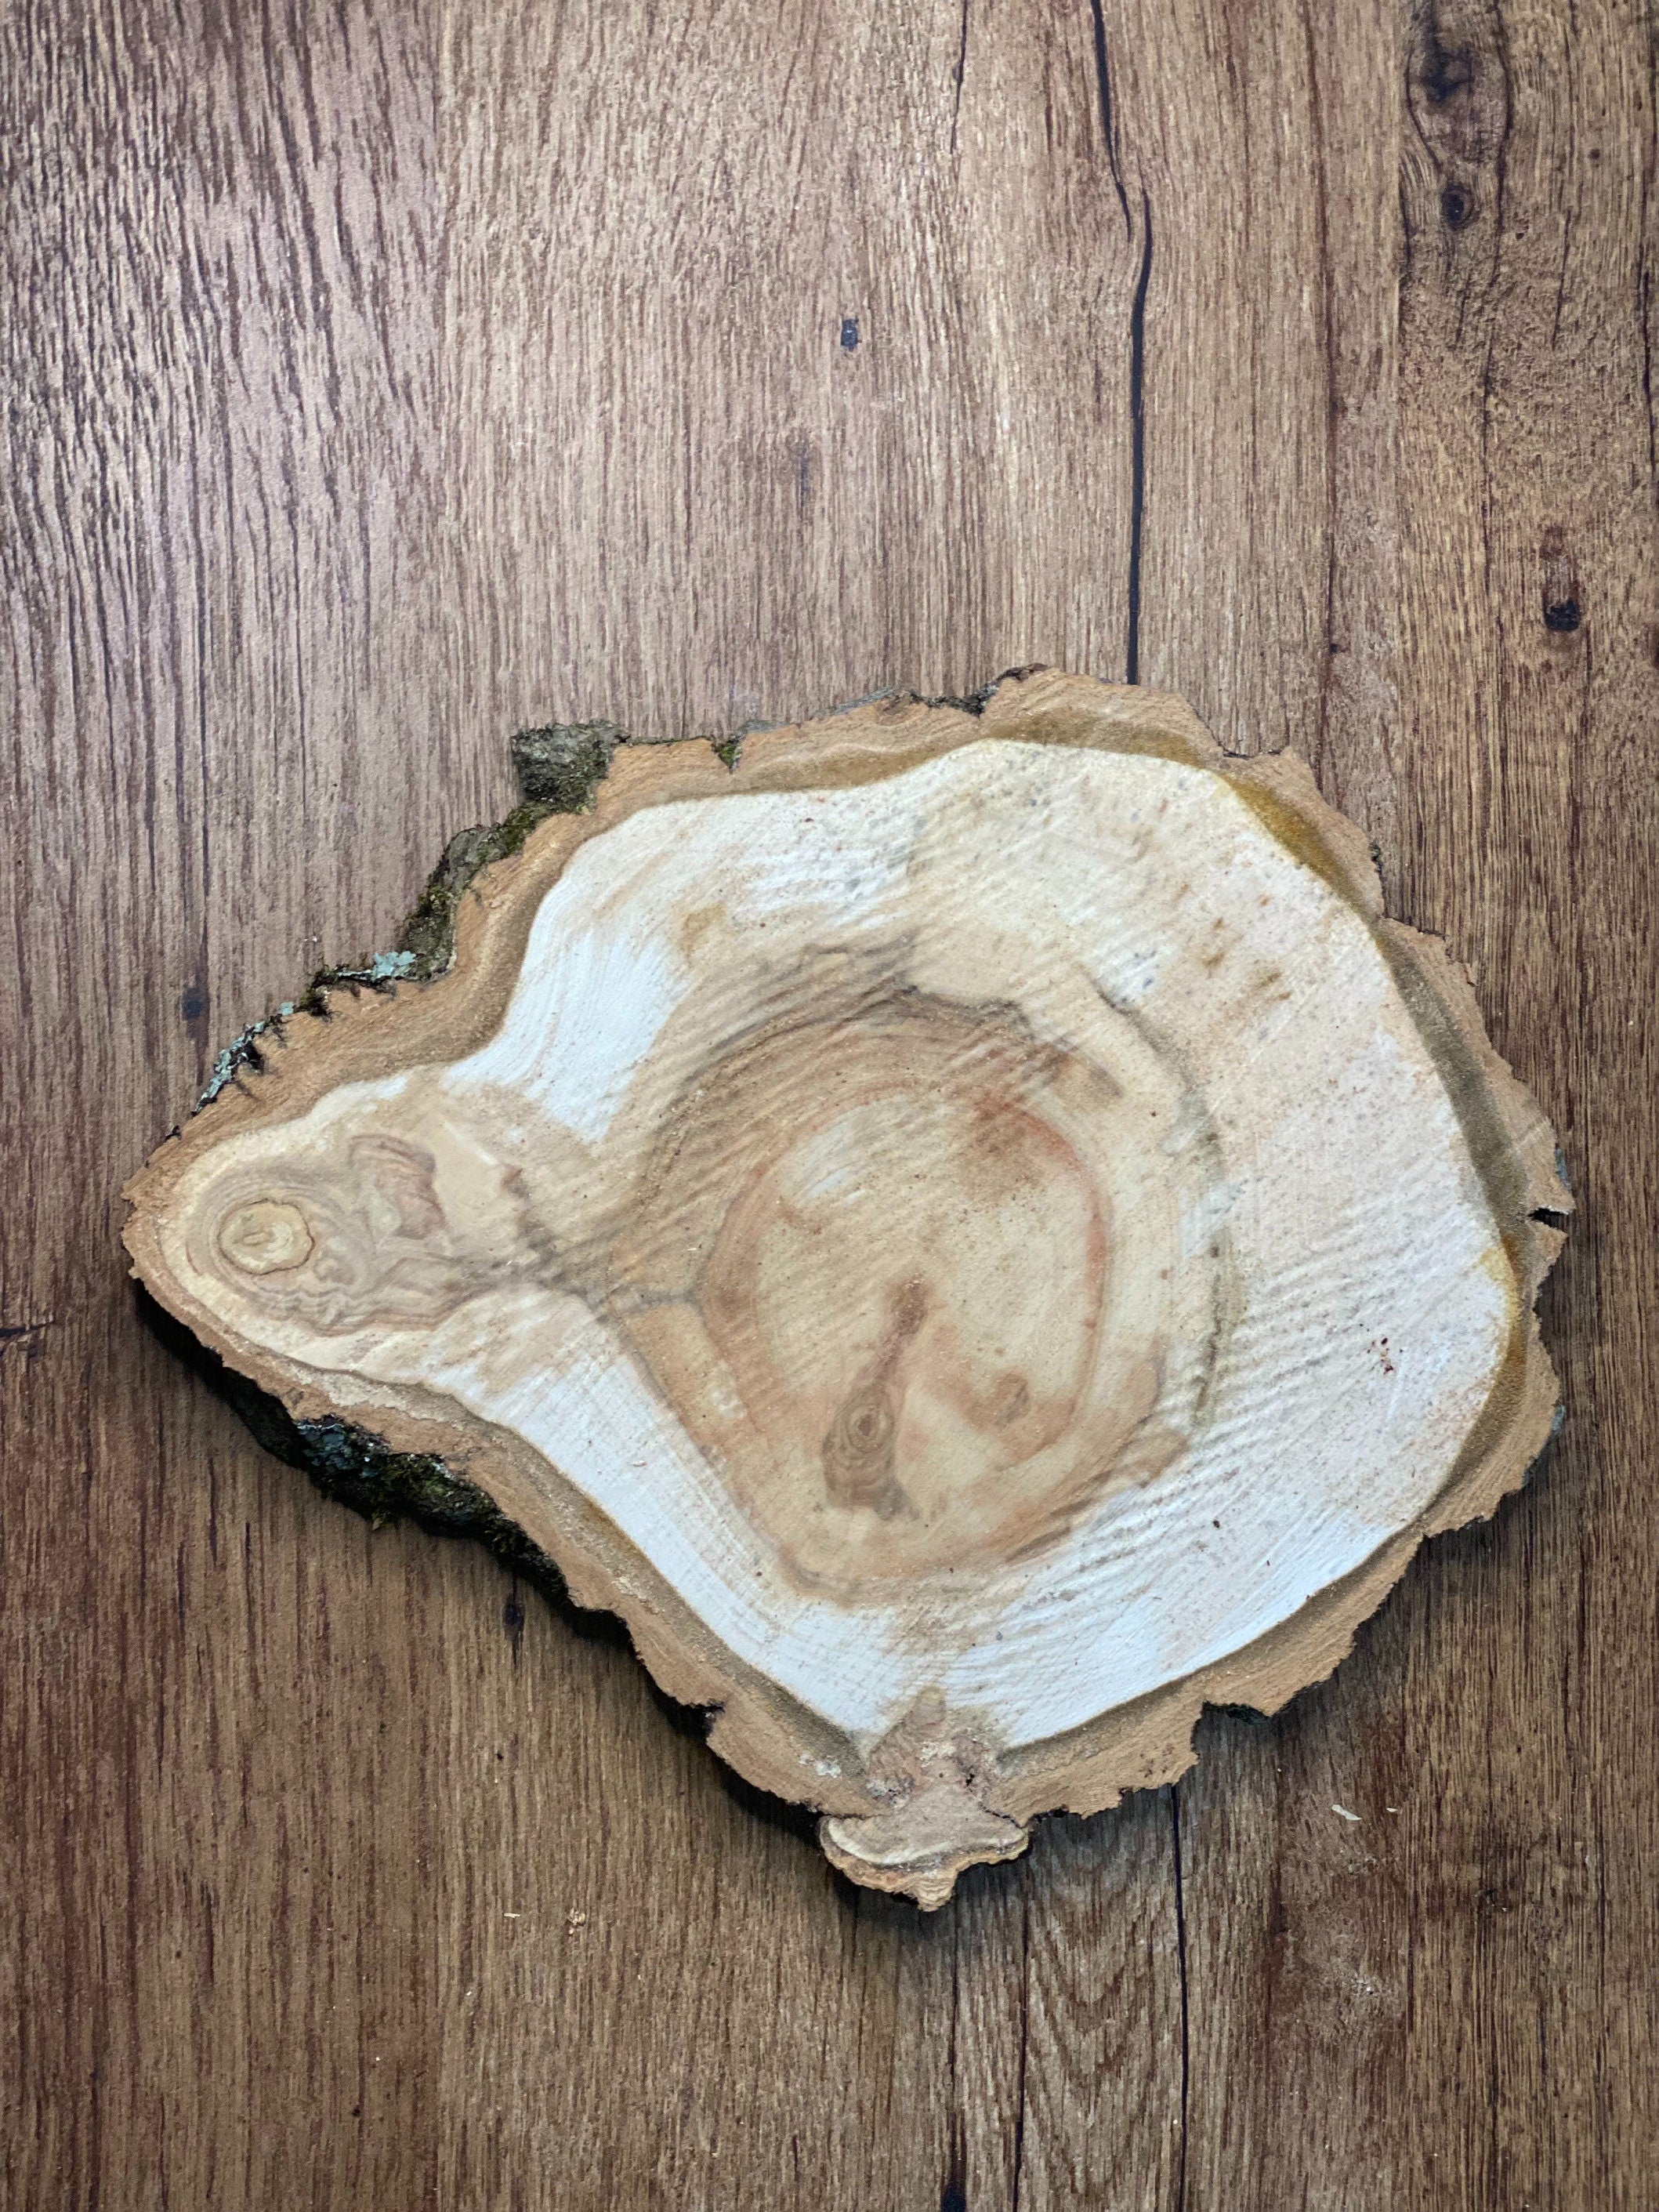 One Large Aspen Slice, Approximately 10.5 Inches Long by 9 Inches Wide and 1 Inch Thick